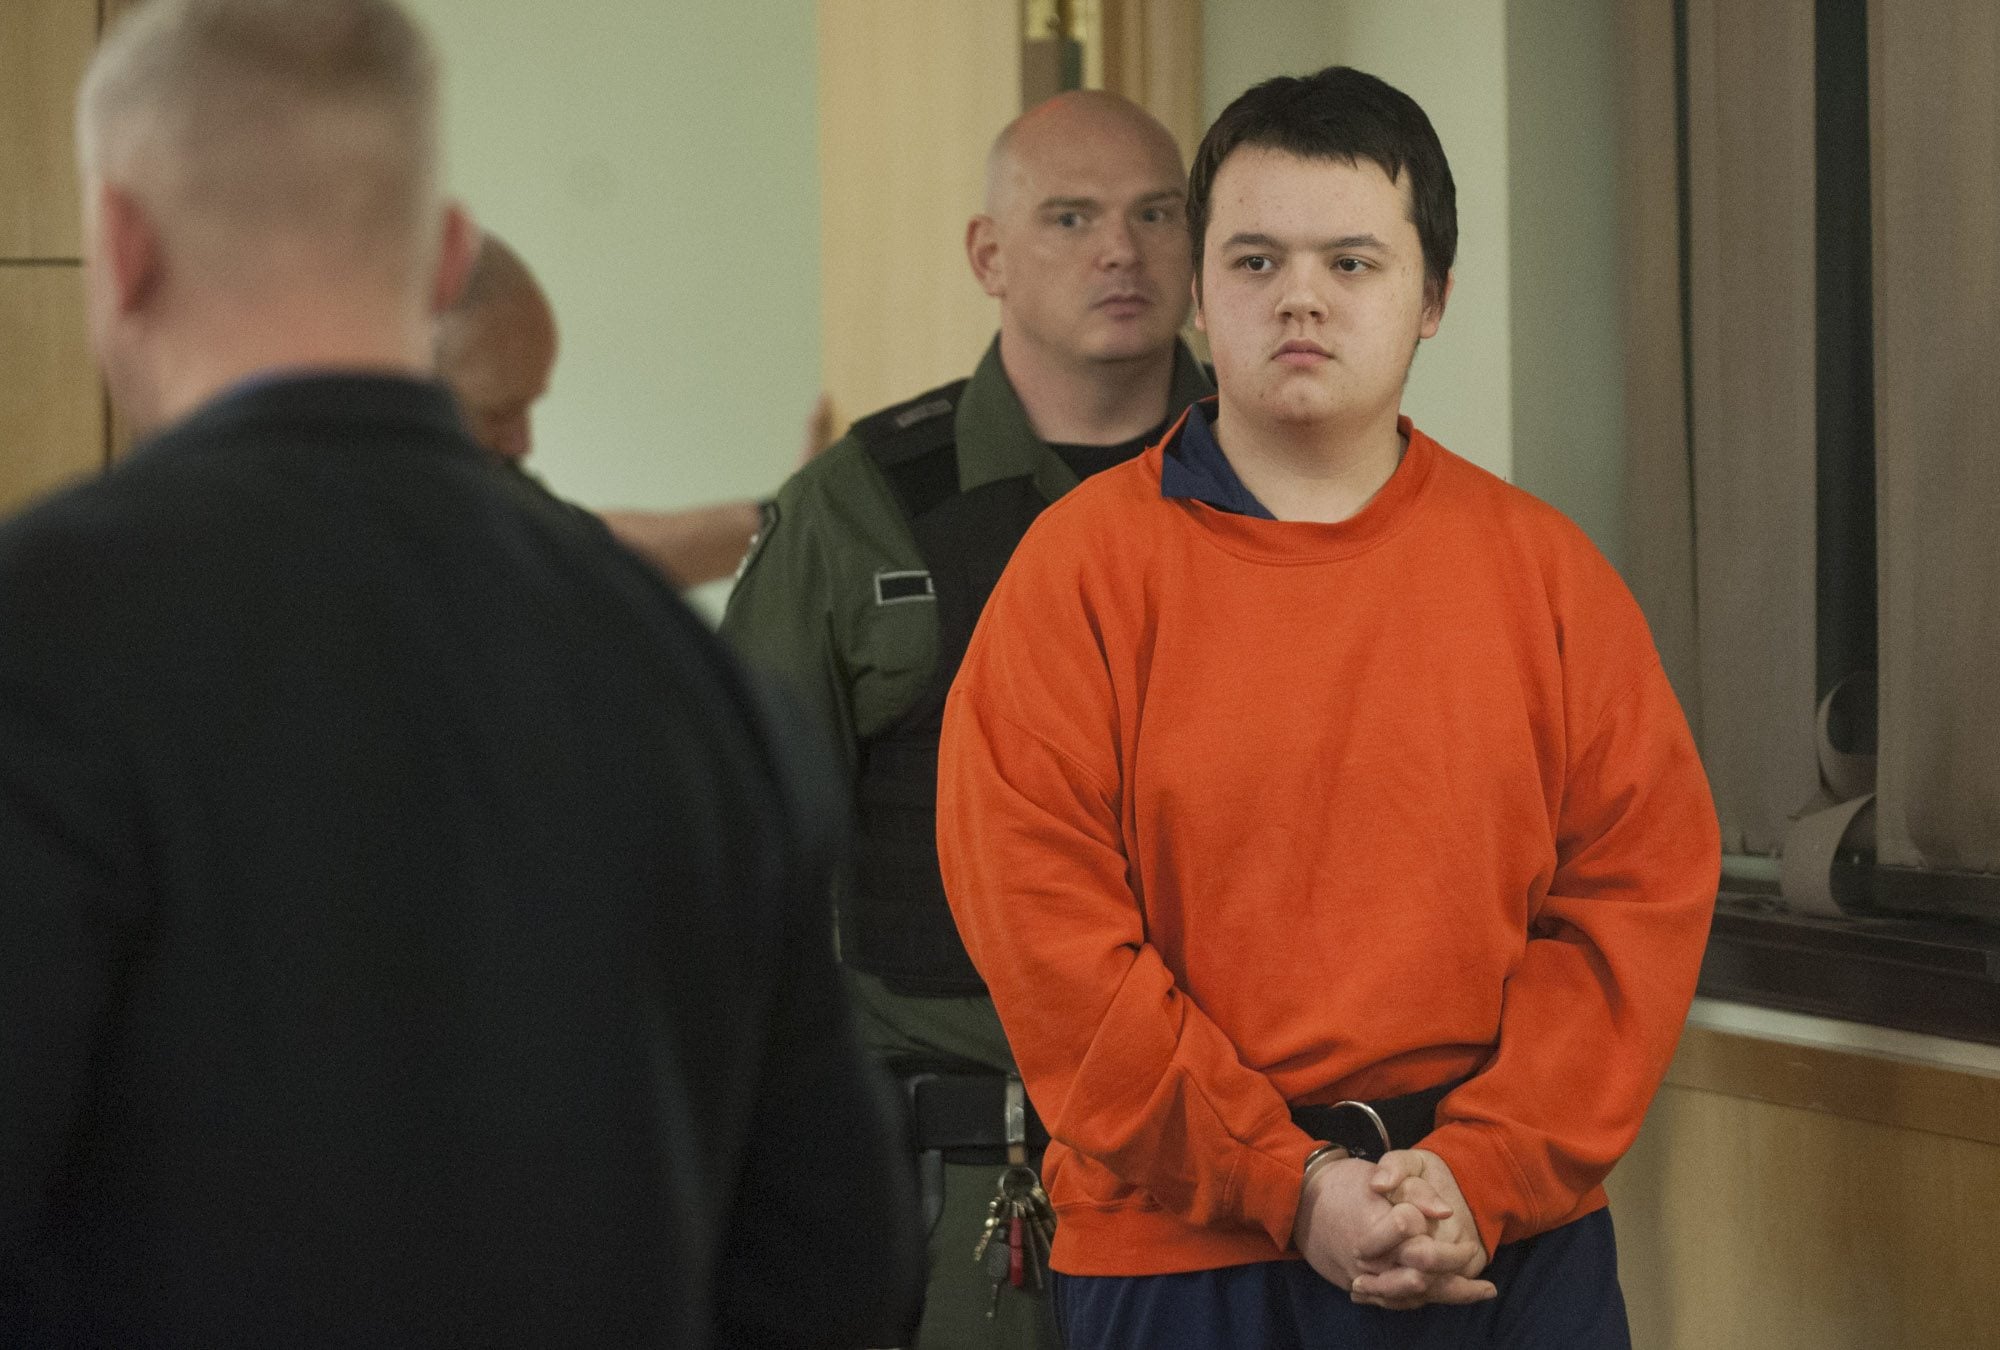 Christopher G. Philbrook, 17, makes a first appearance Friday in Clark County Superior Court on suspicion of attempted first-degree murder. Philbrook, a Columbia River High School student, is accused of striking another male student in the head with a metal, extendable baton at the school on Thursday.